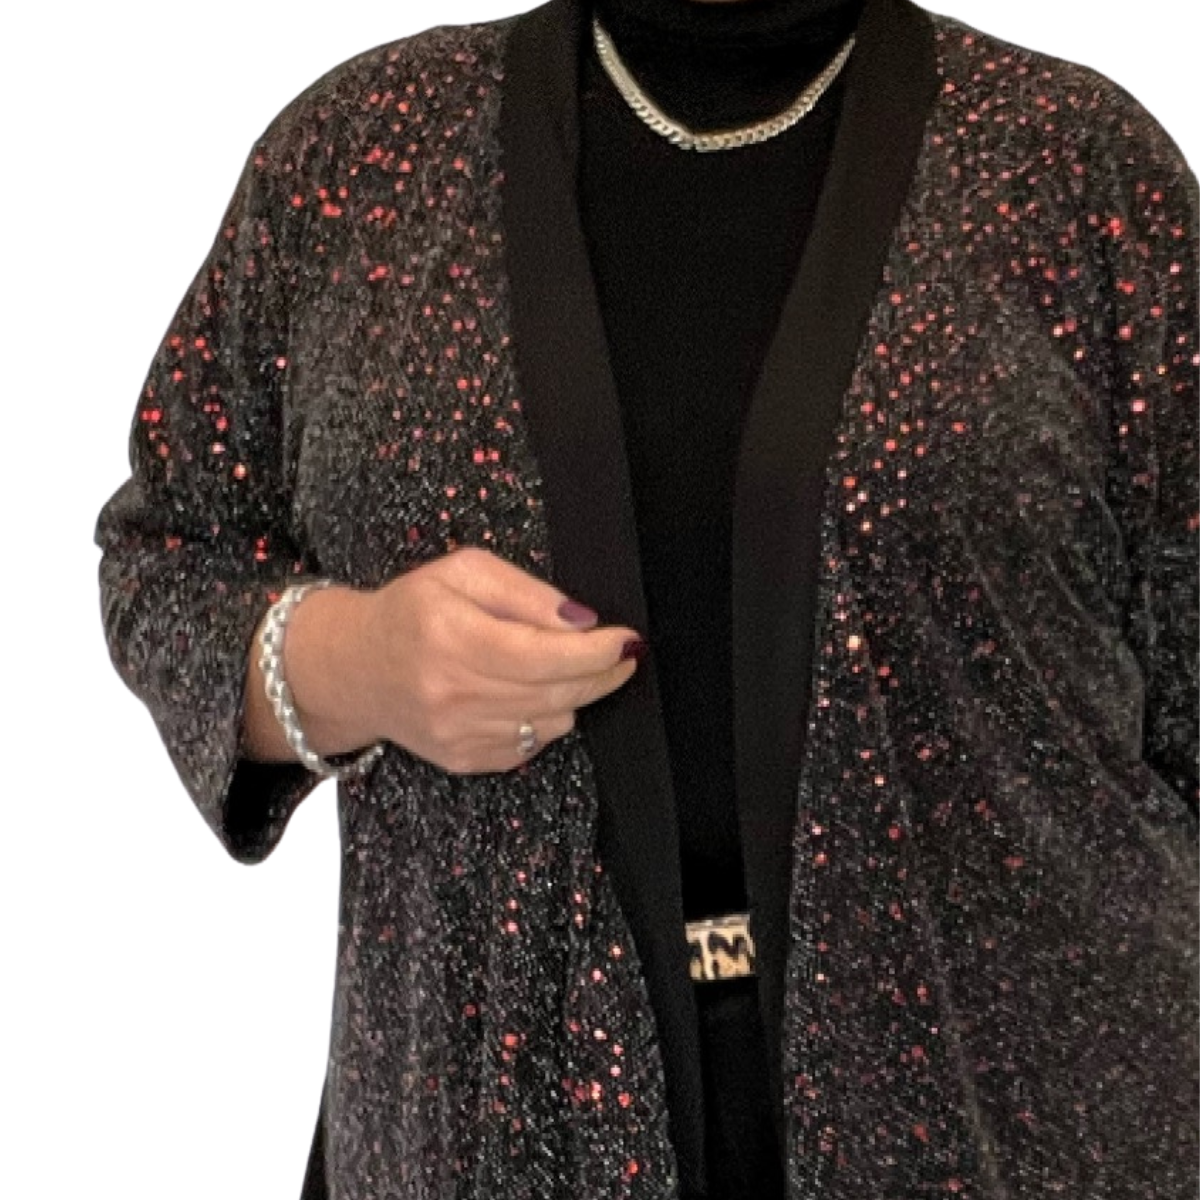 SPARKLY OPEN FRONT PARTY EVENING JACKET WITH SMALL SEQUINS